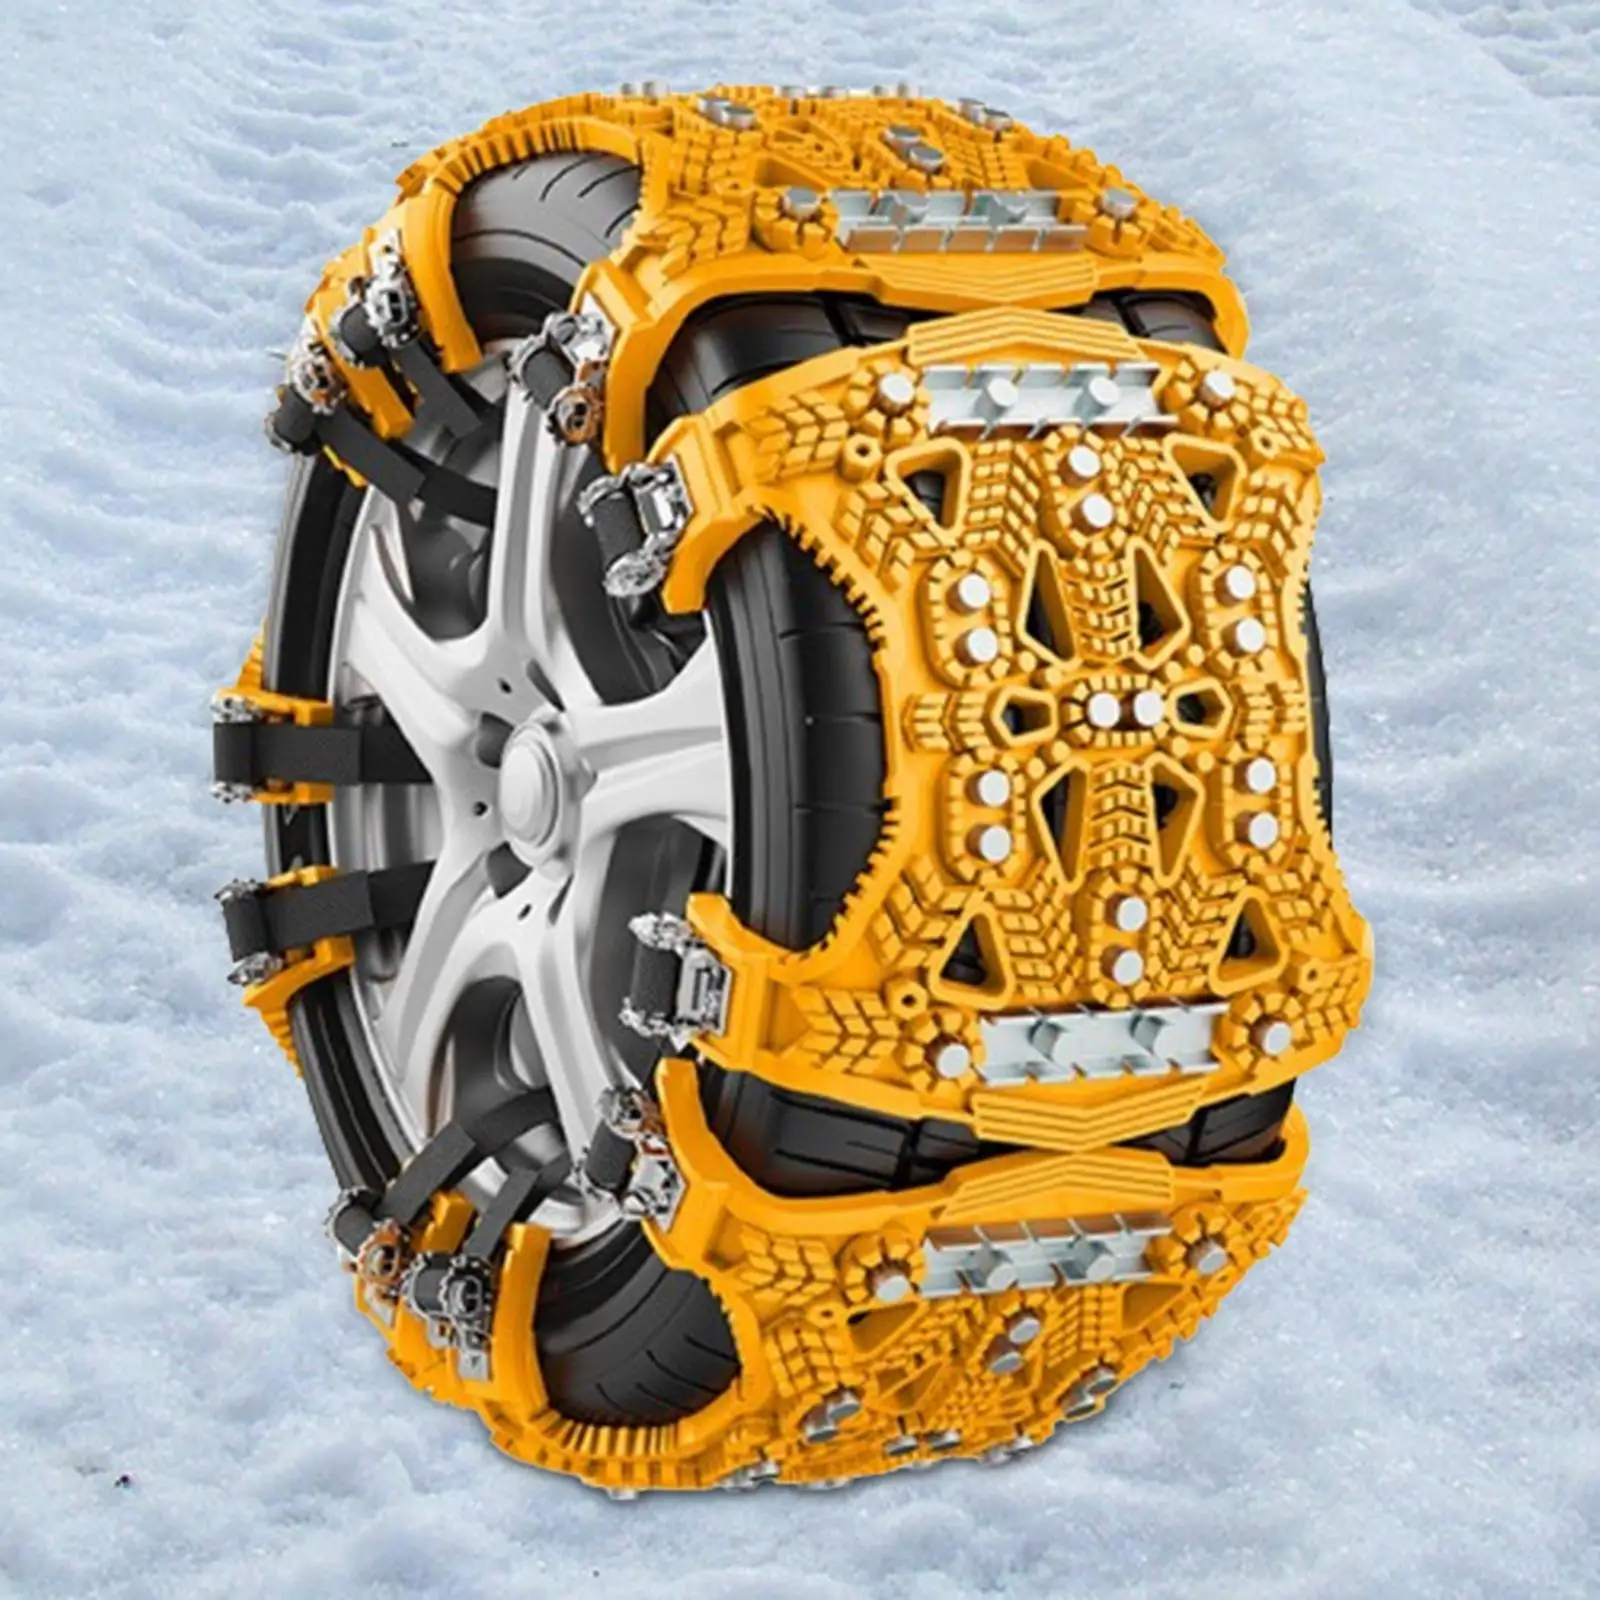 Car Wheel Tire Ice Snow Chain Winter Security Chain for Climbing Road